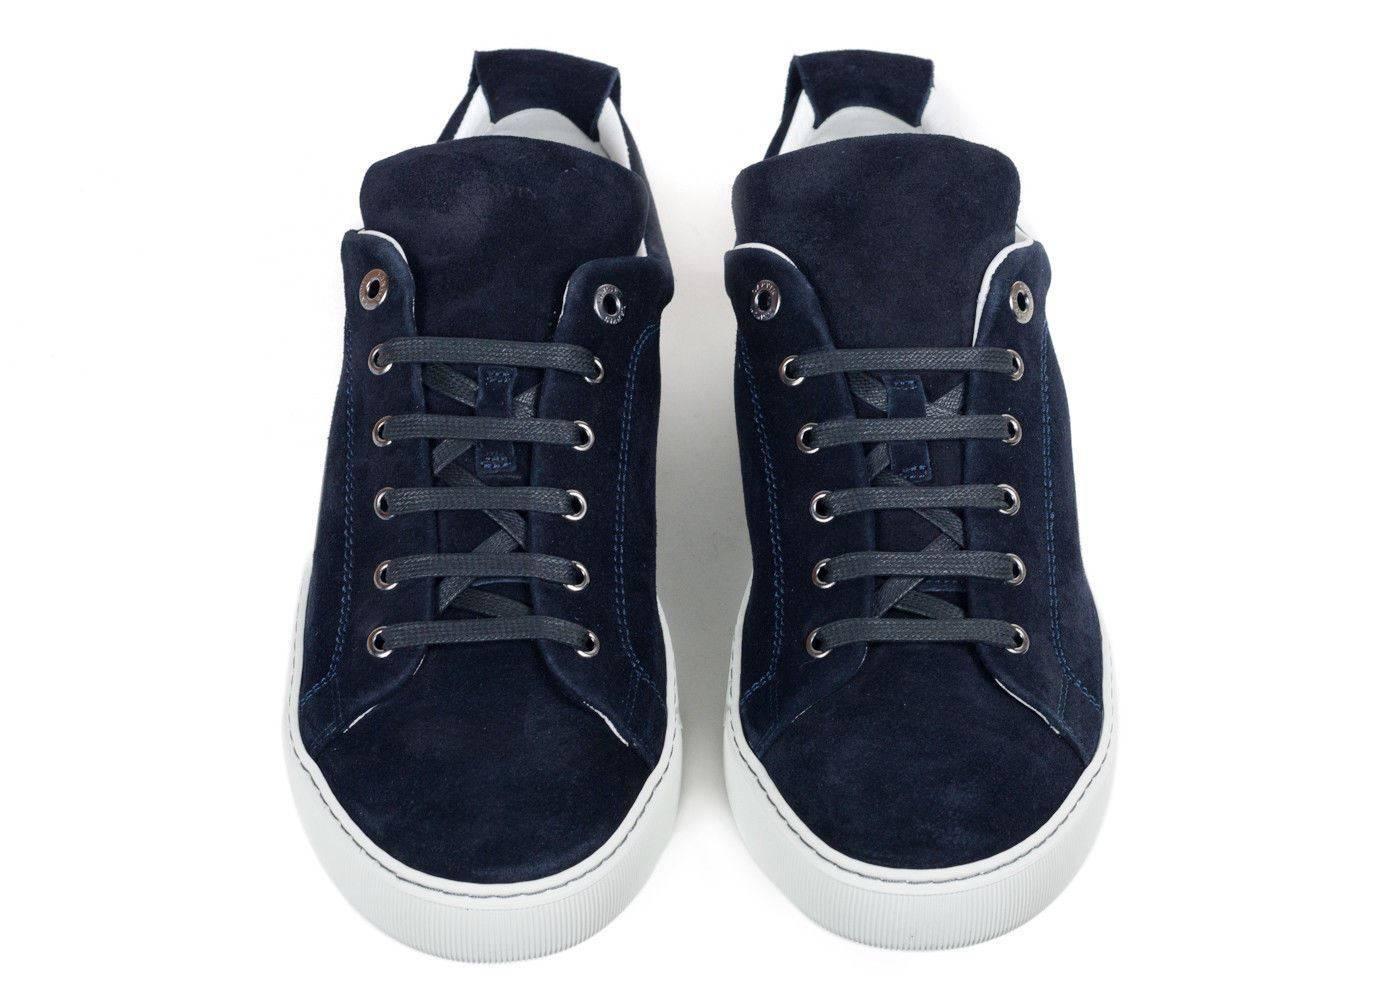 Mens Lanvin Navy Suede Nubuck Calfskin Lace Up Low Top Sneakers In New Condition For Sale In Brooklyn, NY